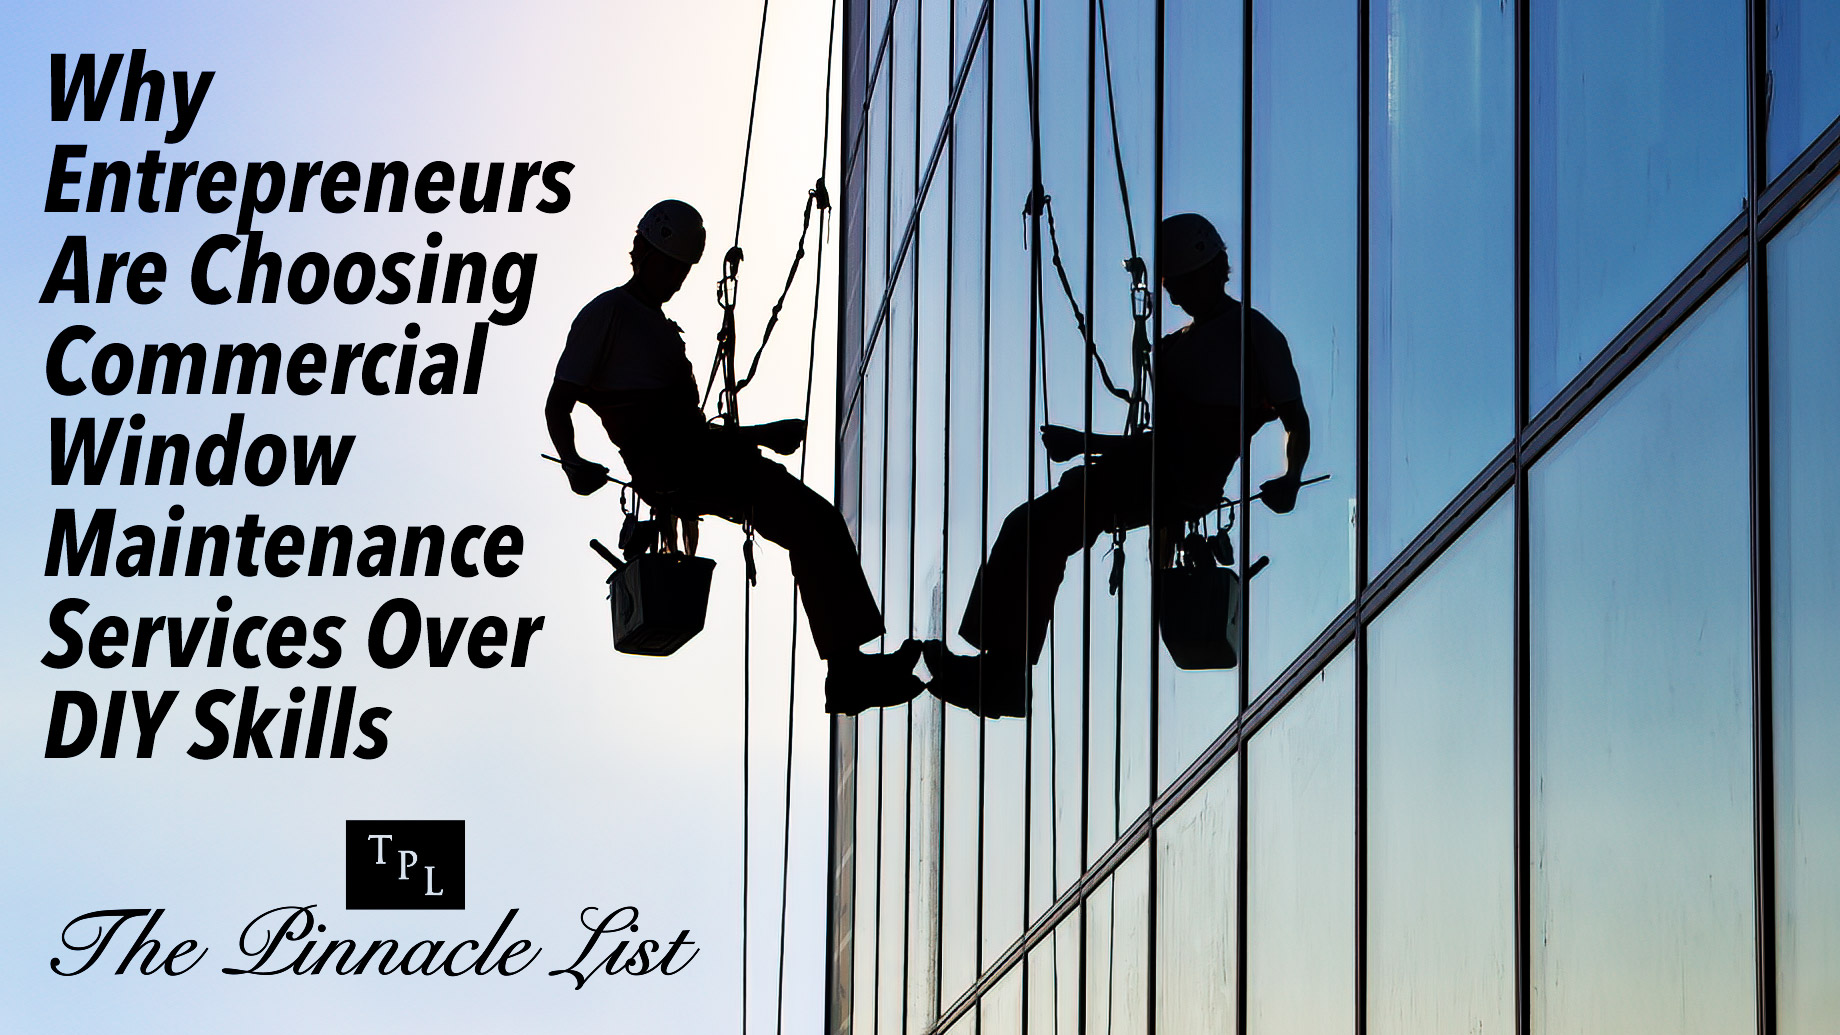 Why Entrepreneurs Are Choosing Commercial Window Maintenance Services Over DIY Skills